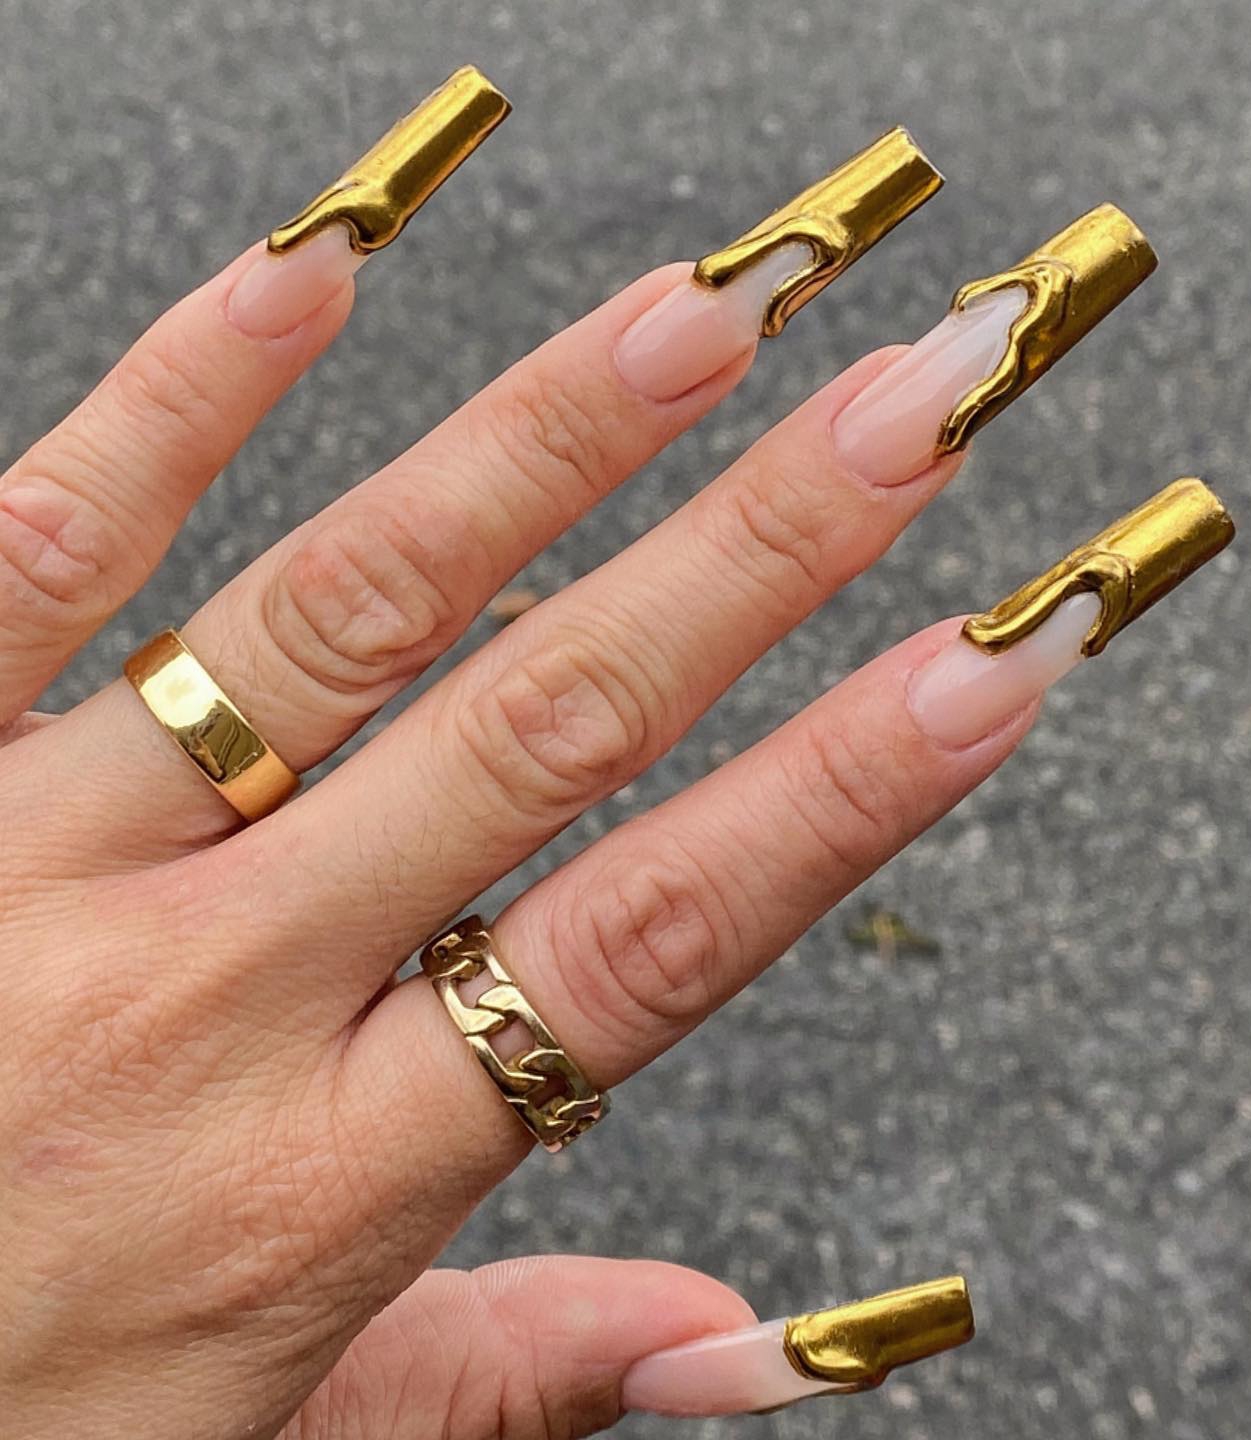 Long Square Nails with Gold 3D Tips